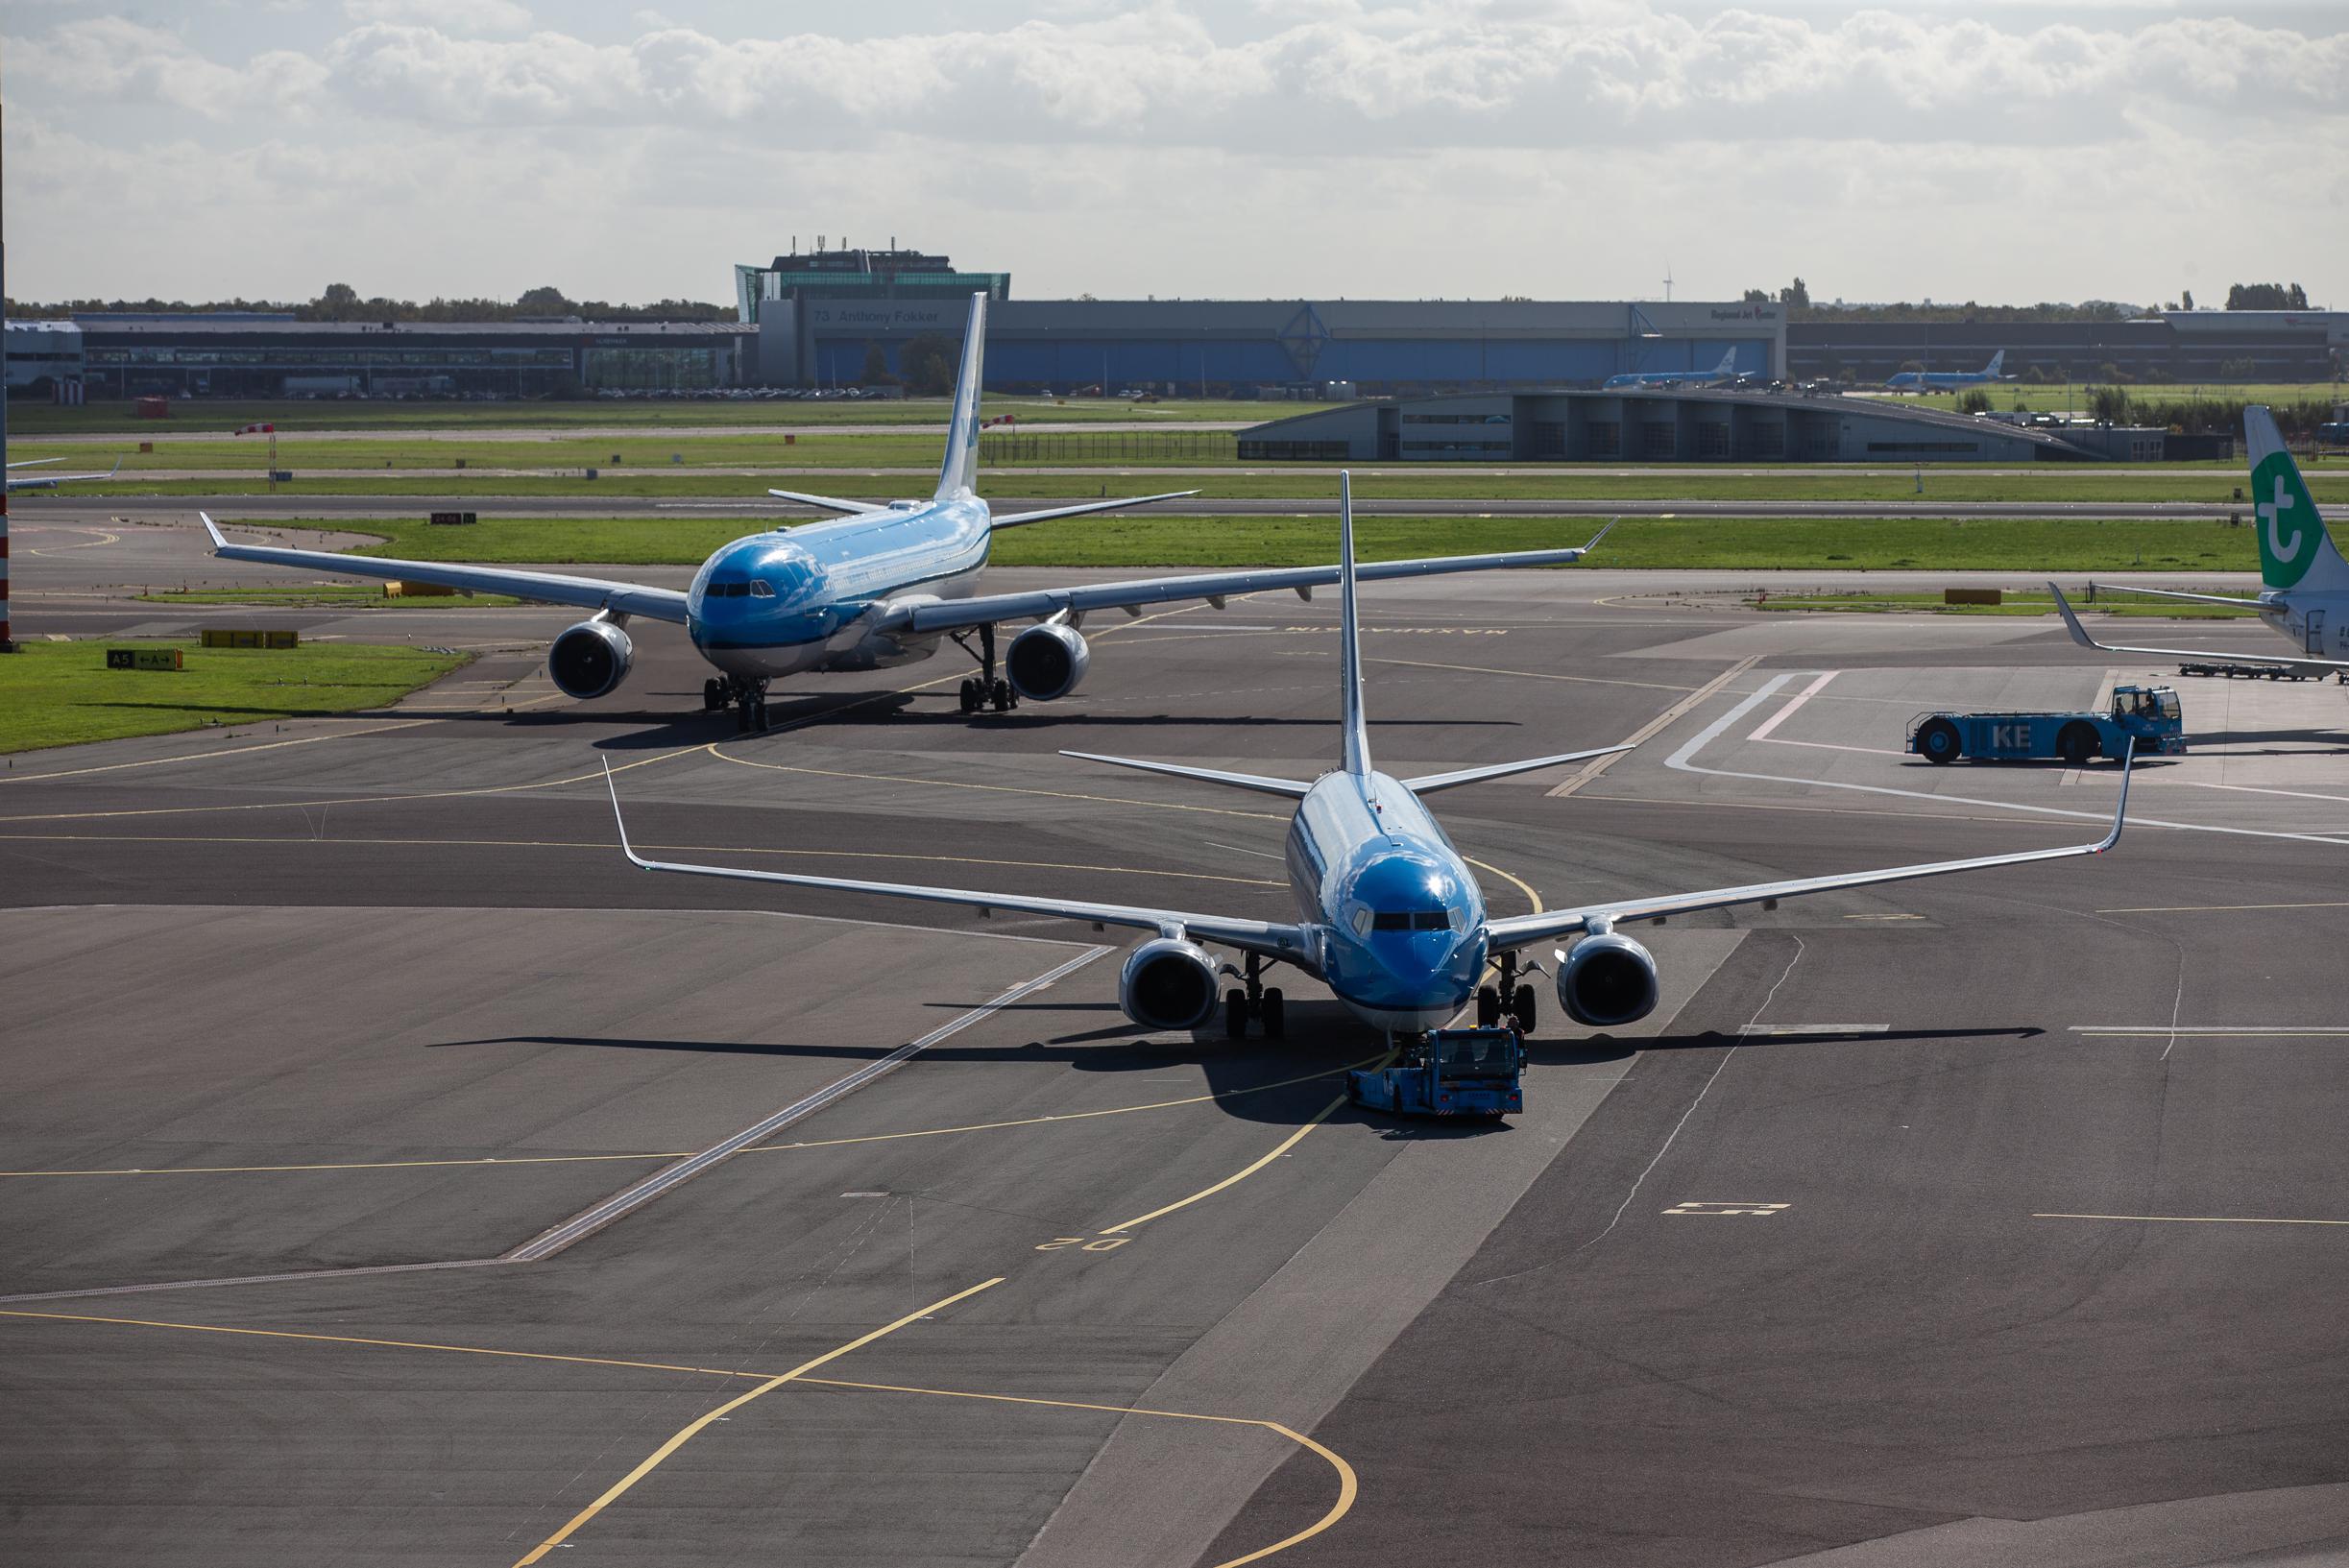 Severe weather causes 117 flight cancellations at Schiphol Airport